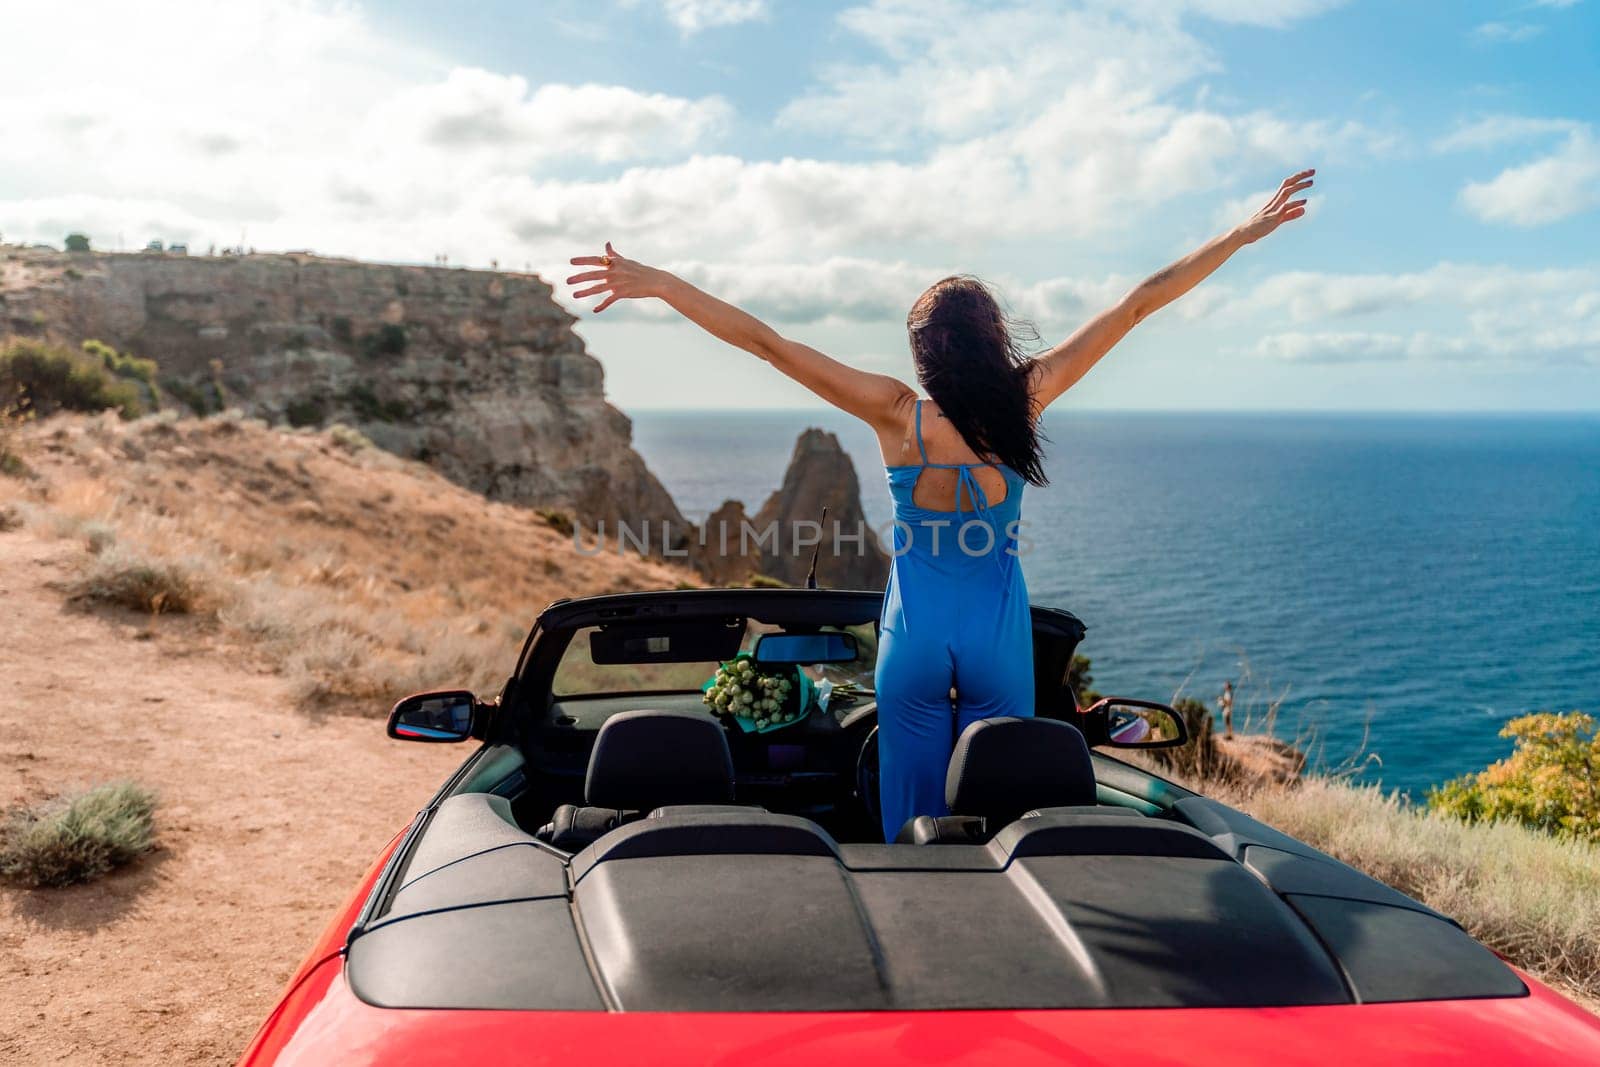 A woman is standing on the roof of a red convertible car, looking out at the ocean. She is smiling and she is enjoying the view